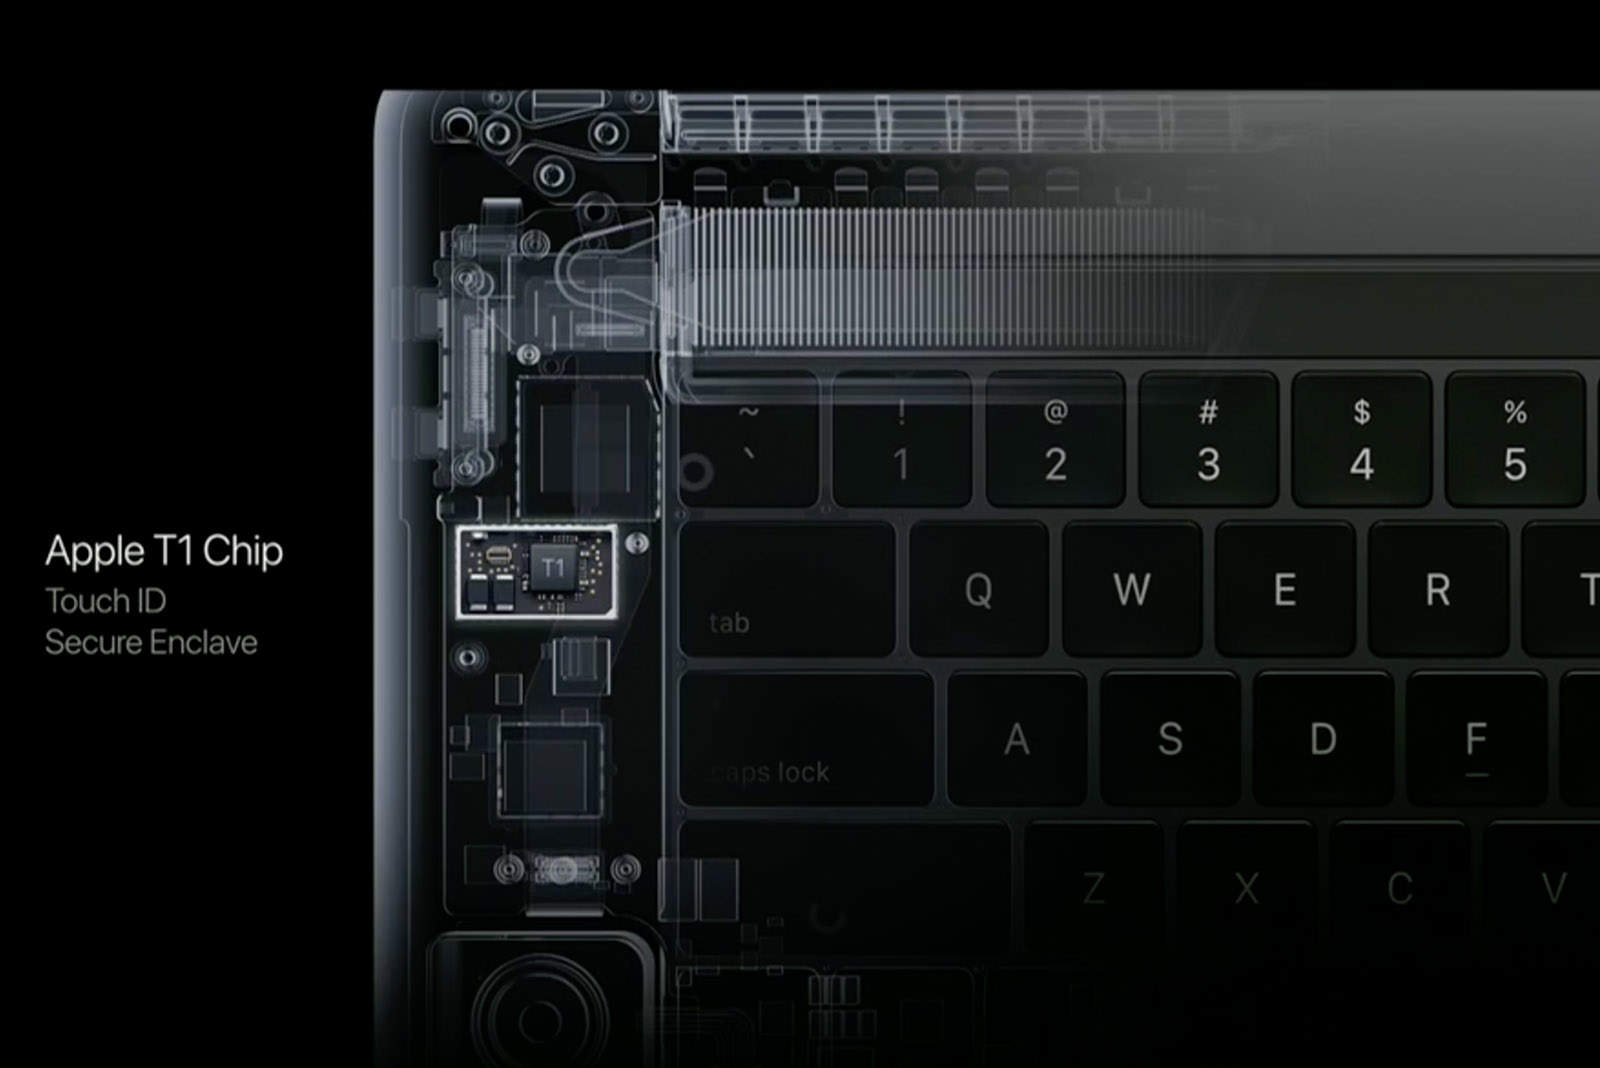 The MacBook Pro has a special T1 chip inside.